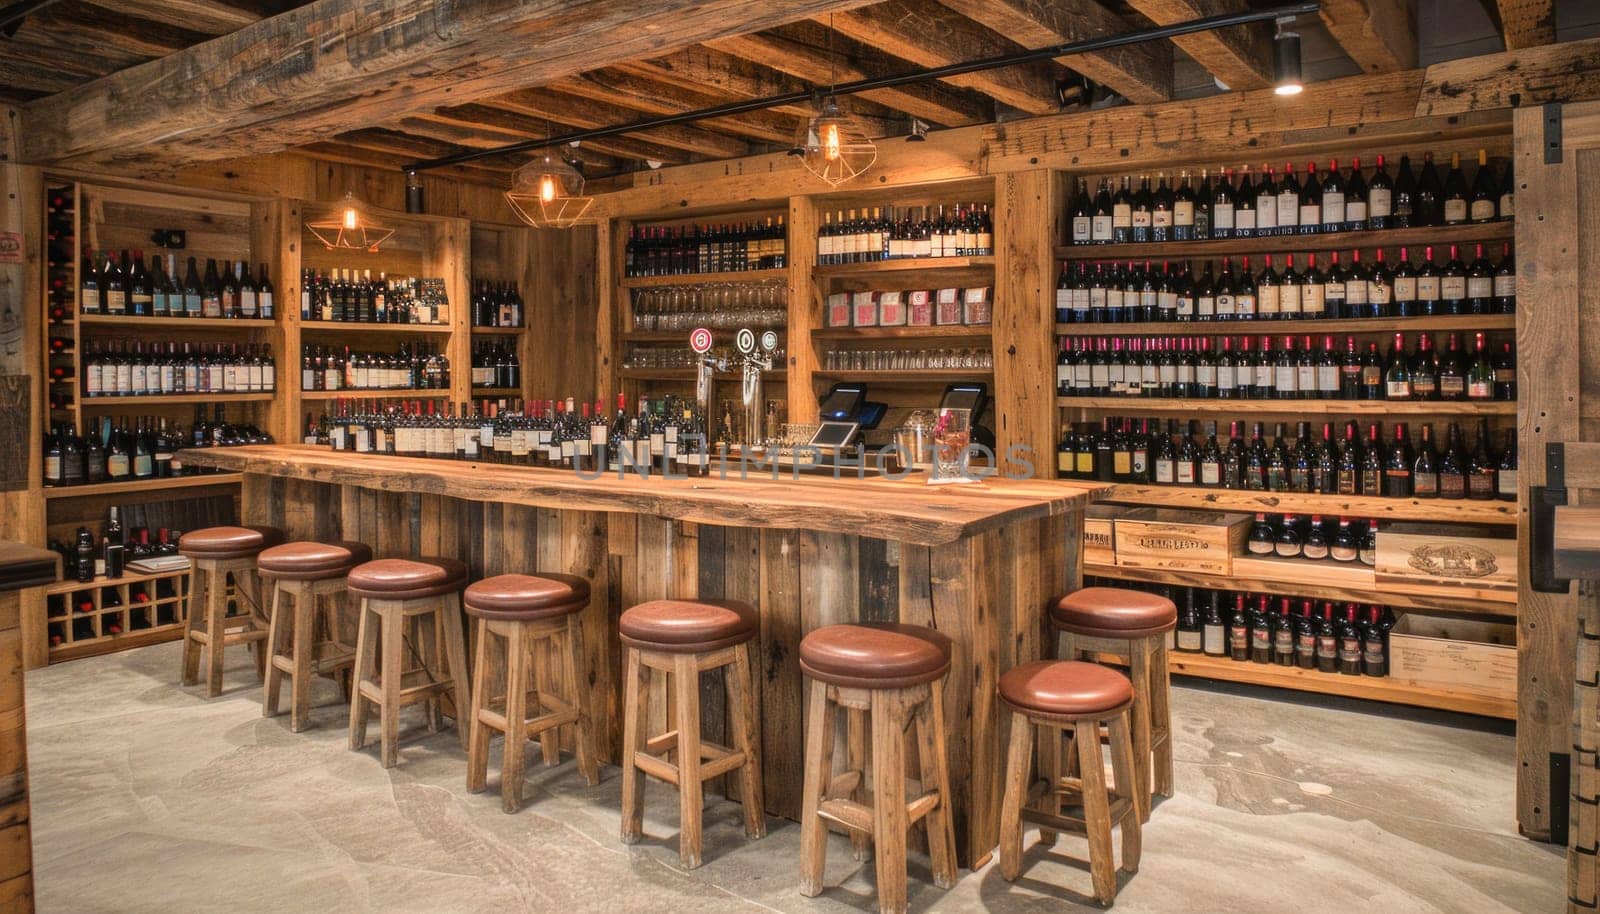 The wine cellar has a wooden bar and stools, creating a welcoming space for wine lovers to enjoy their drinks